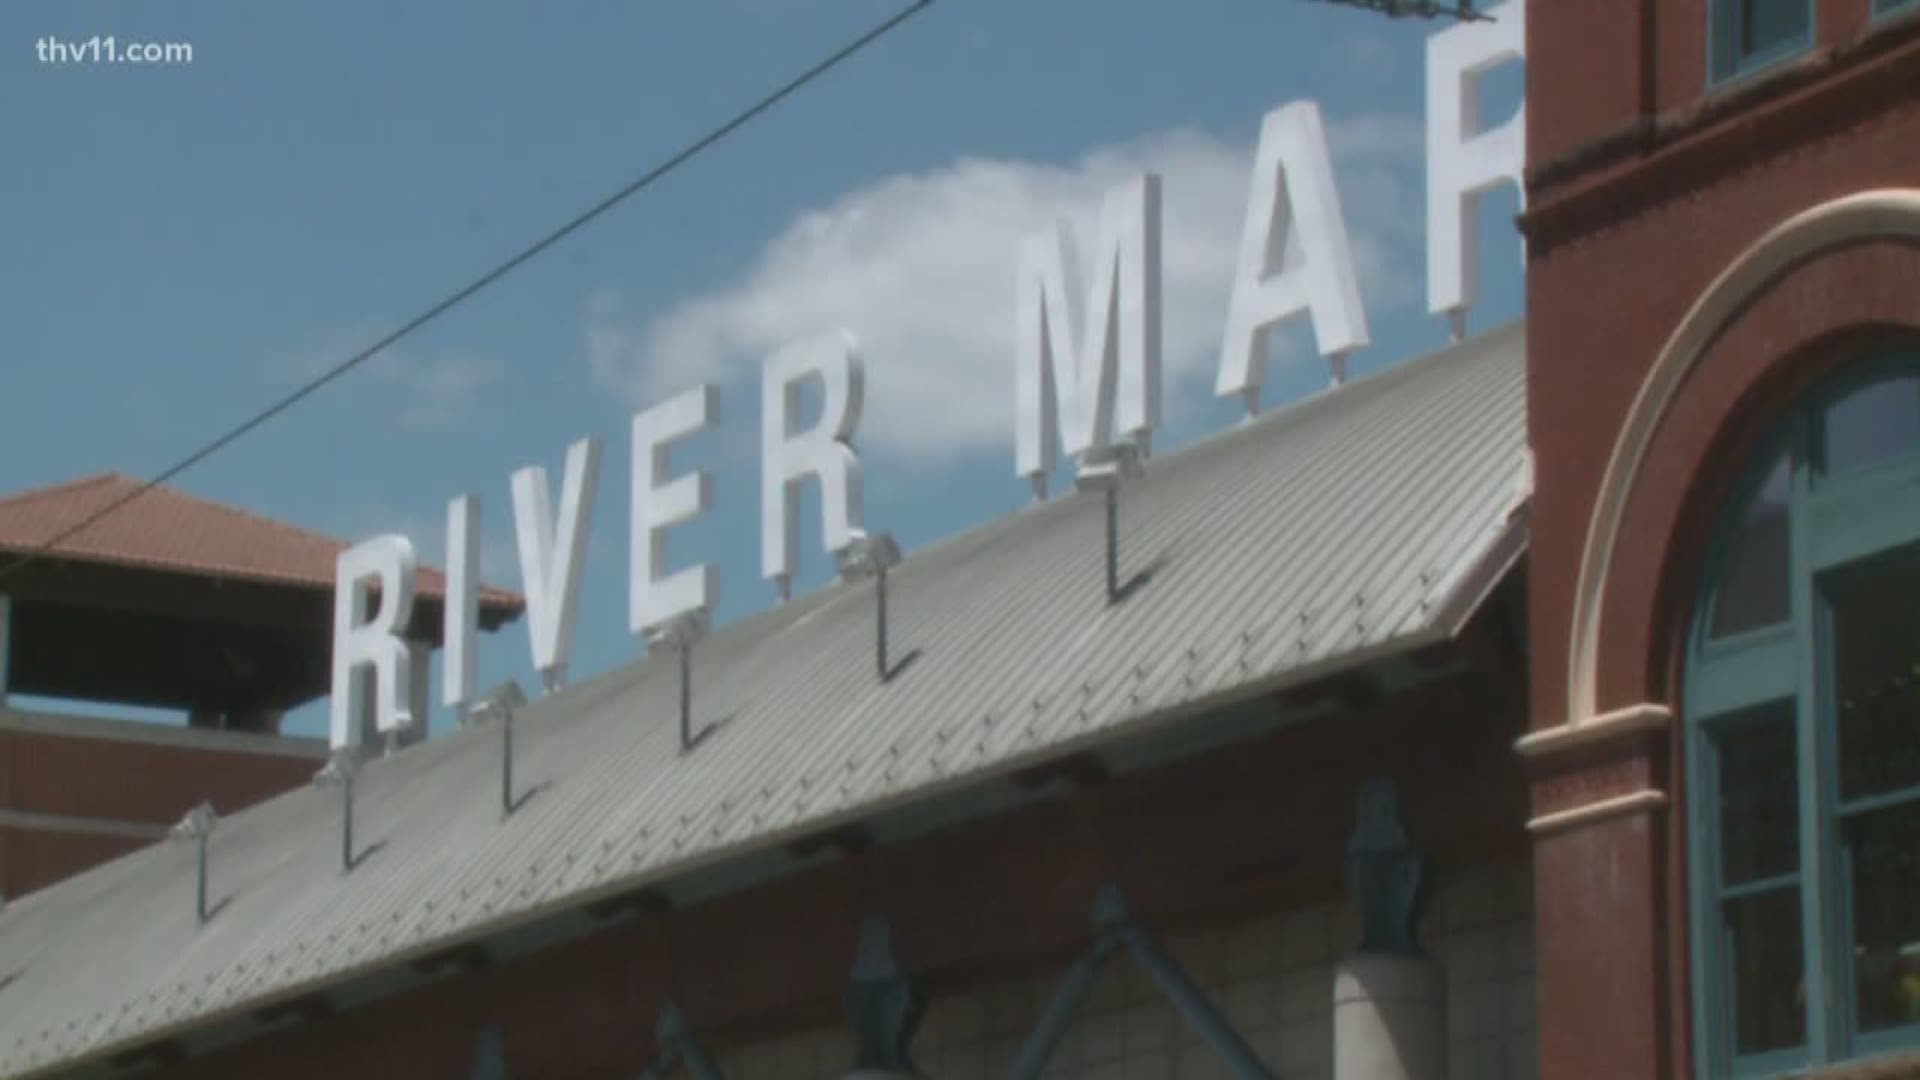 We now know all the details about a new Entertainment District in the River Market.